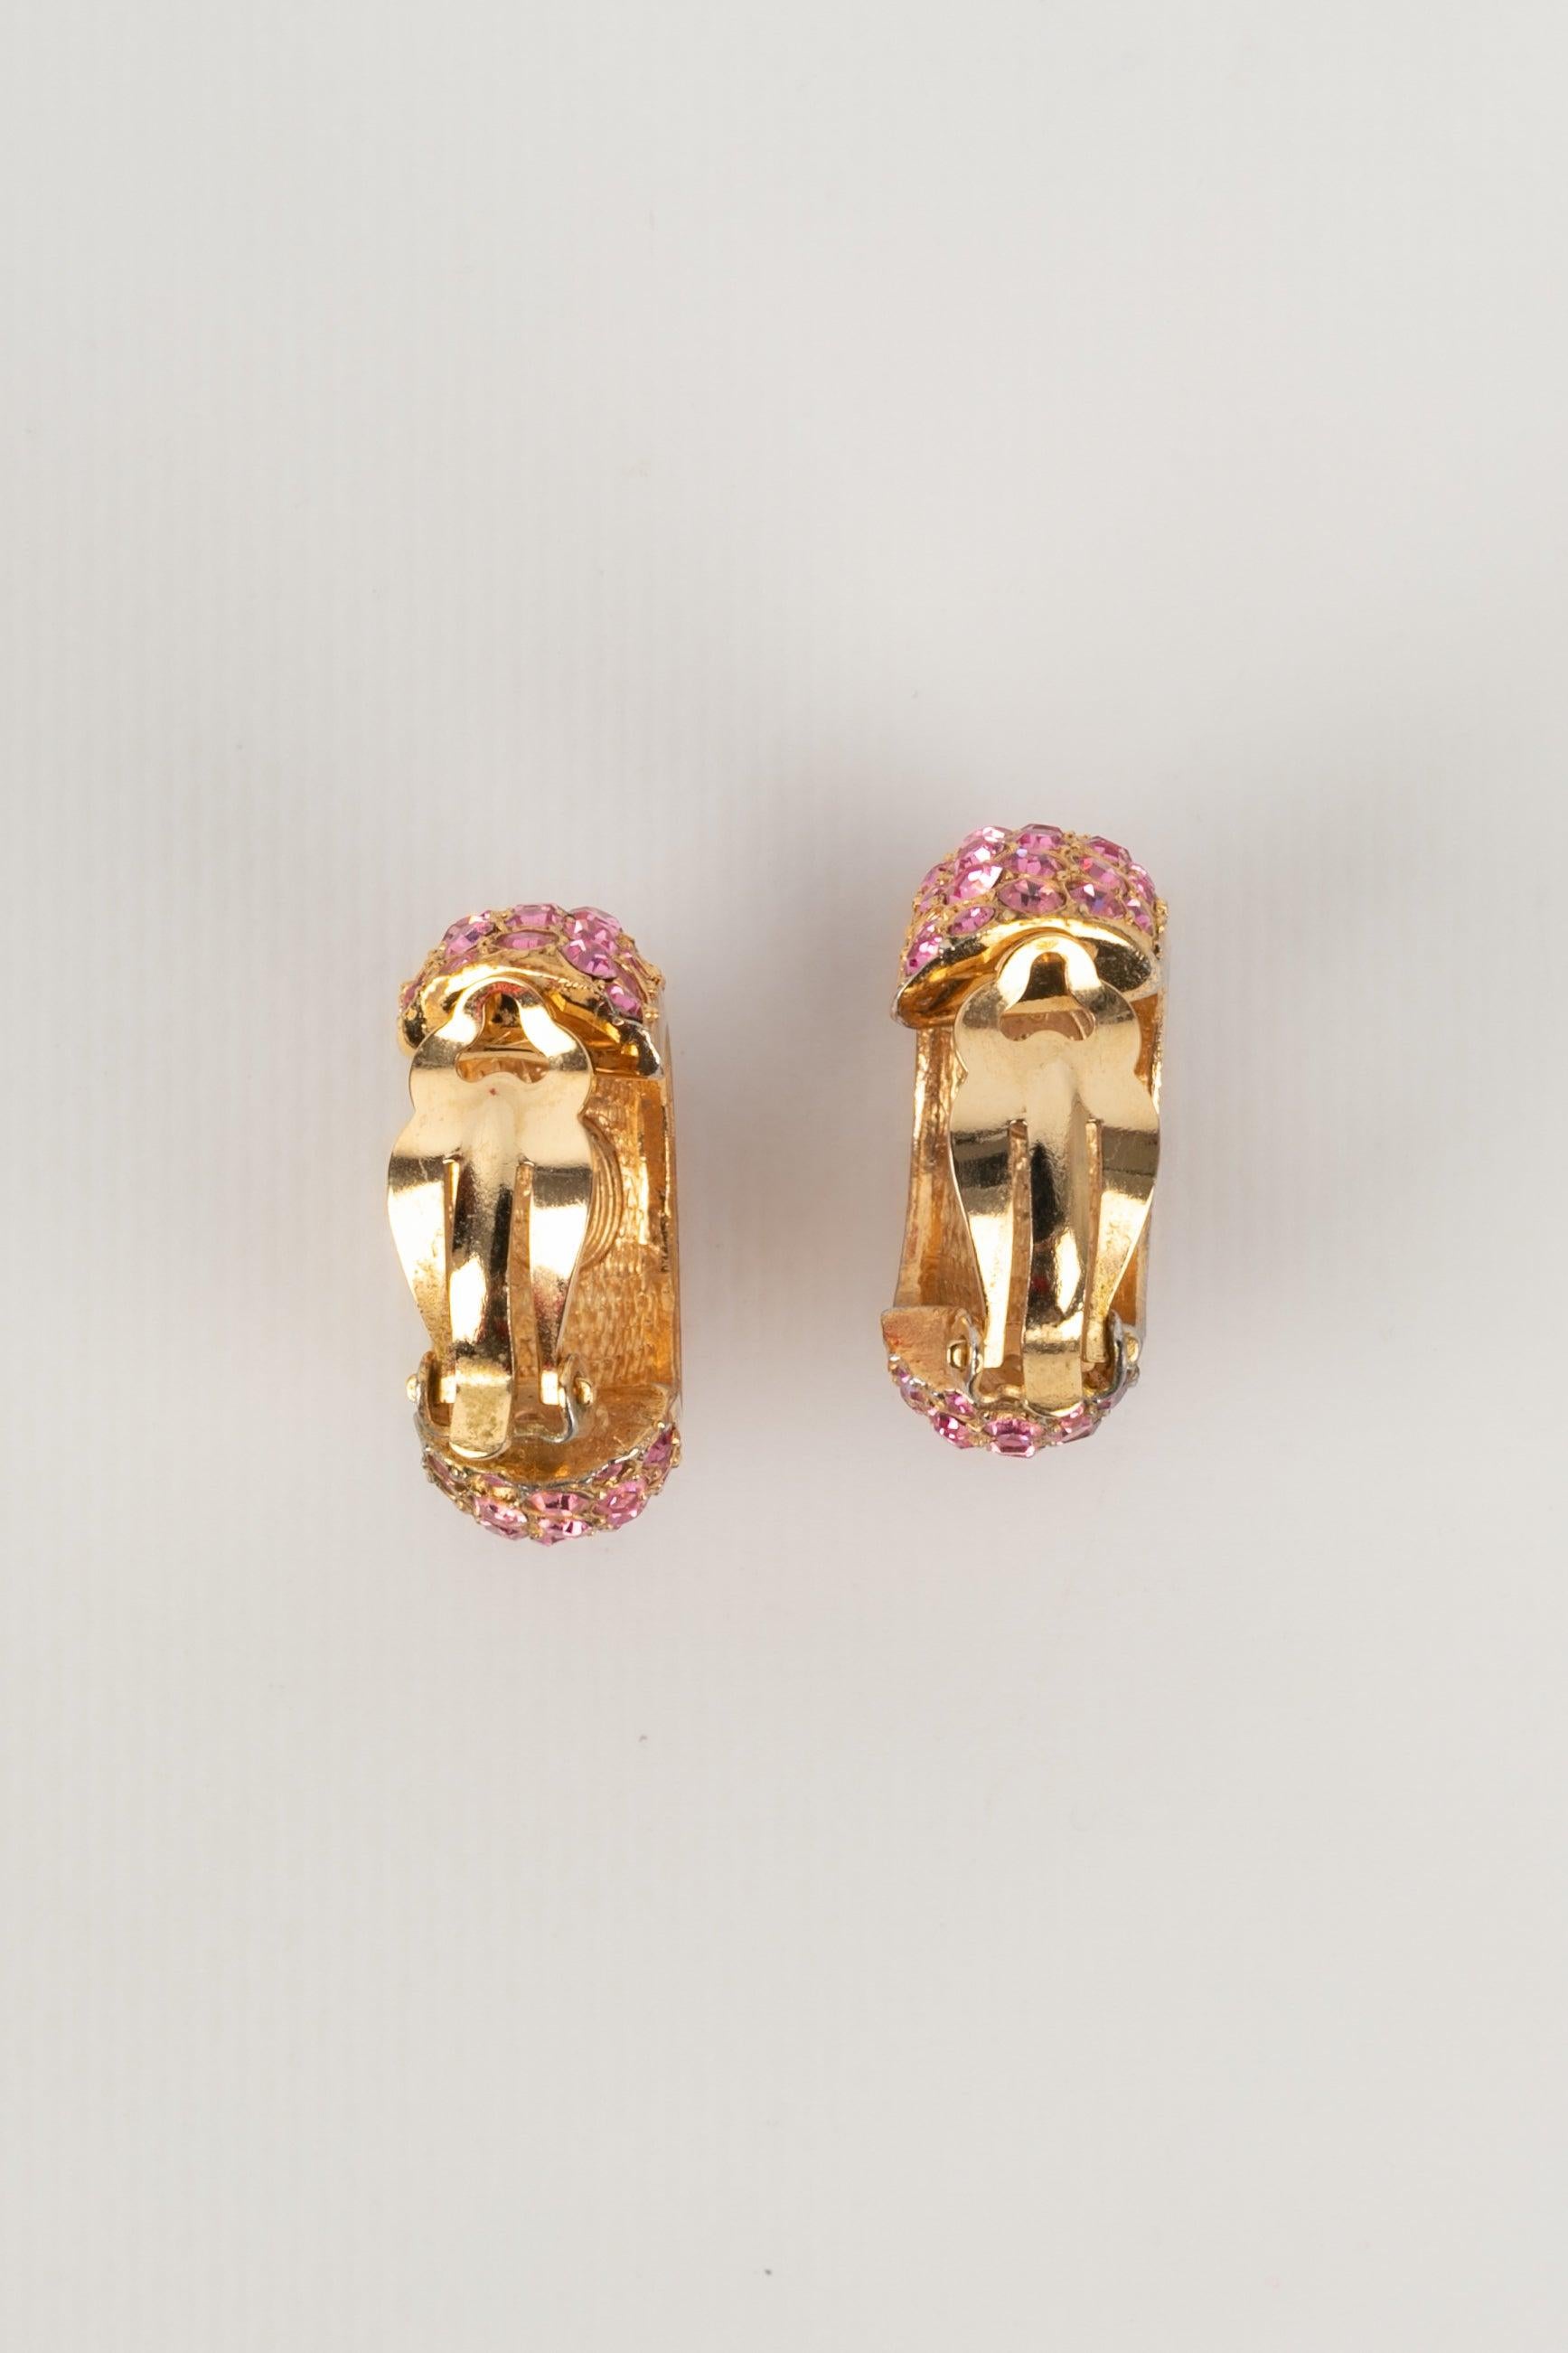 Christian Dior - Golden metal clip-on earrings ornamented with pink rhinestones.

Additional information:
Condition: Very good condition
Dimensions: Height: 3.5 cm

Seller Reference: BO62
